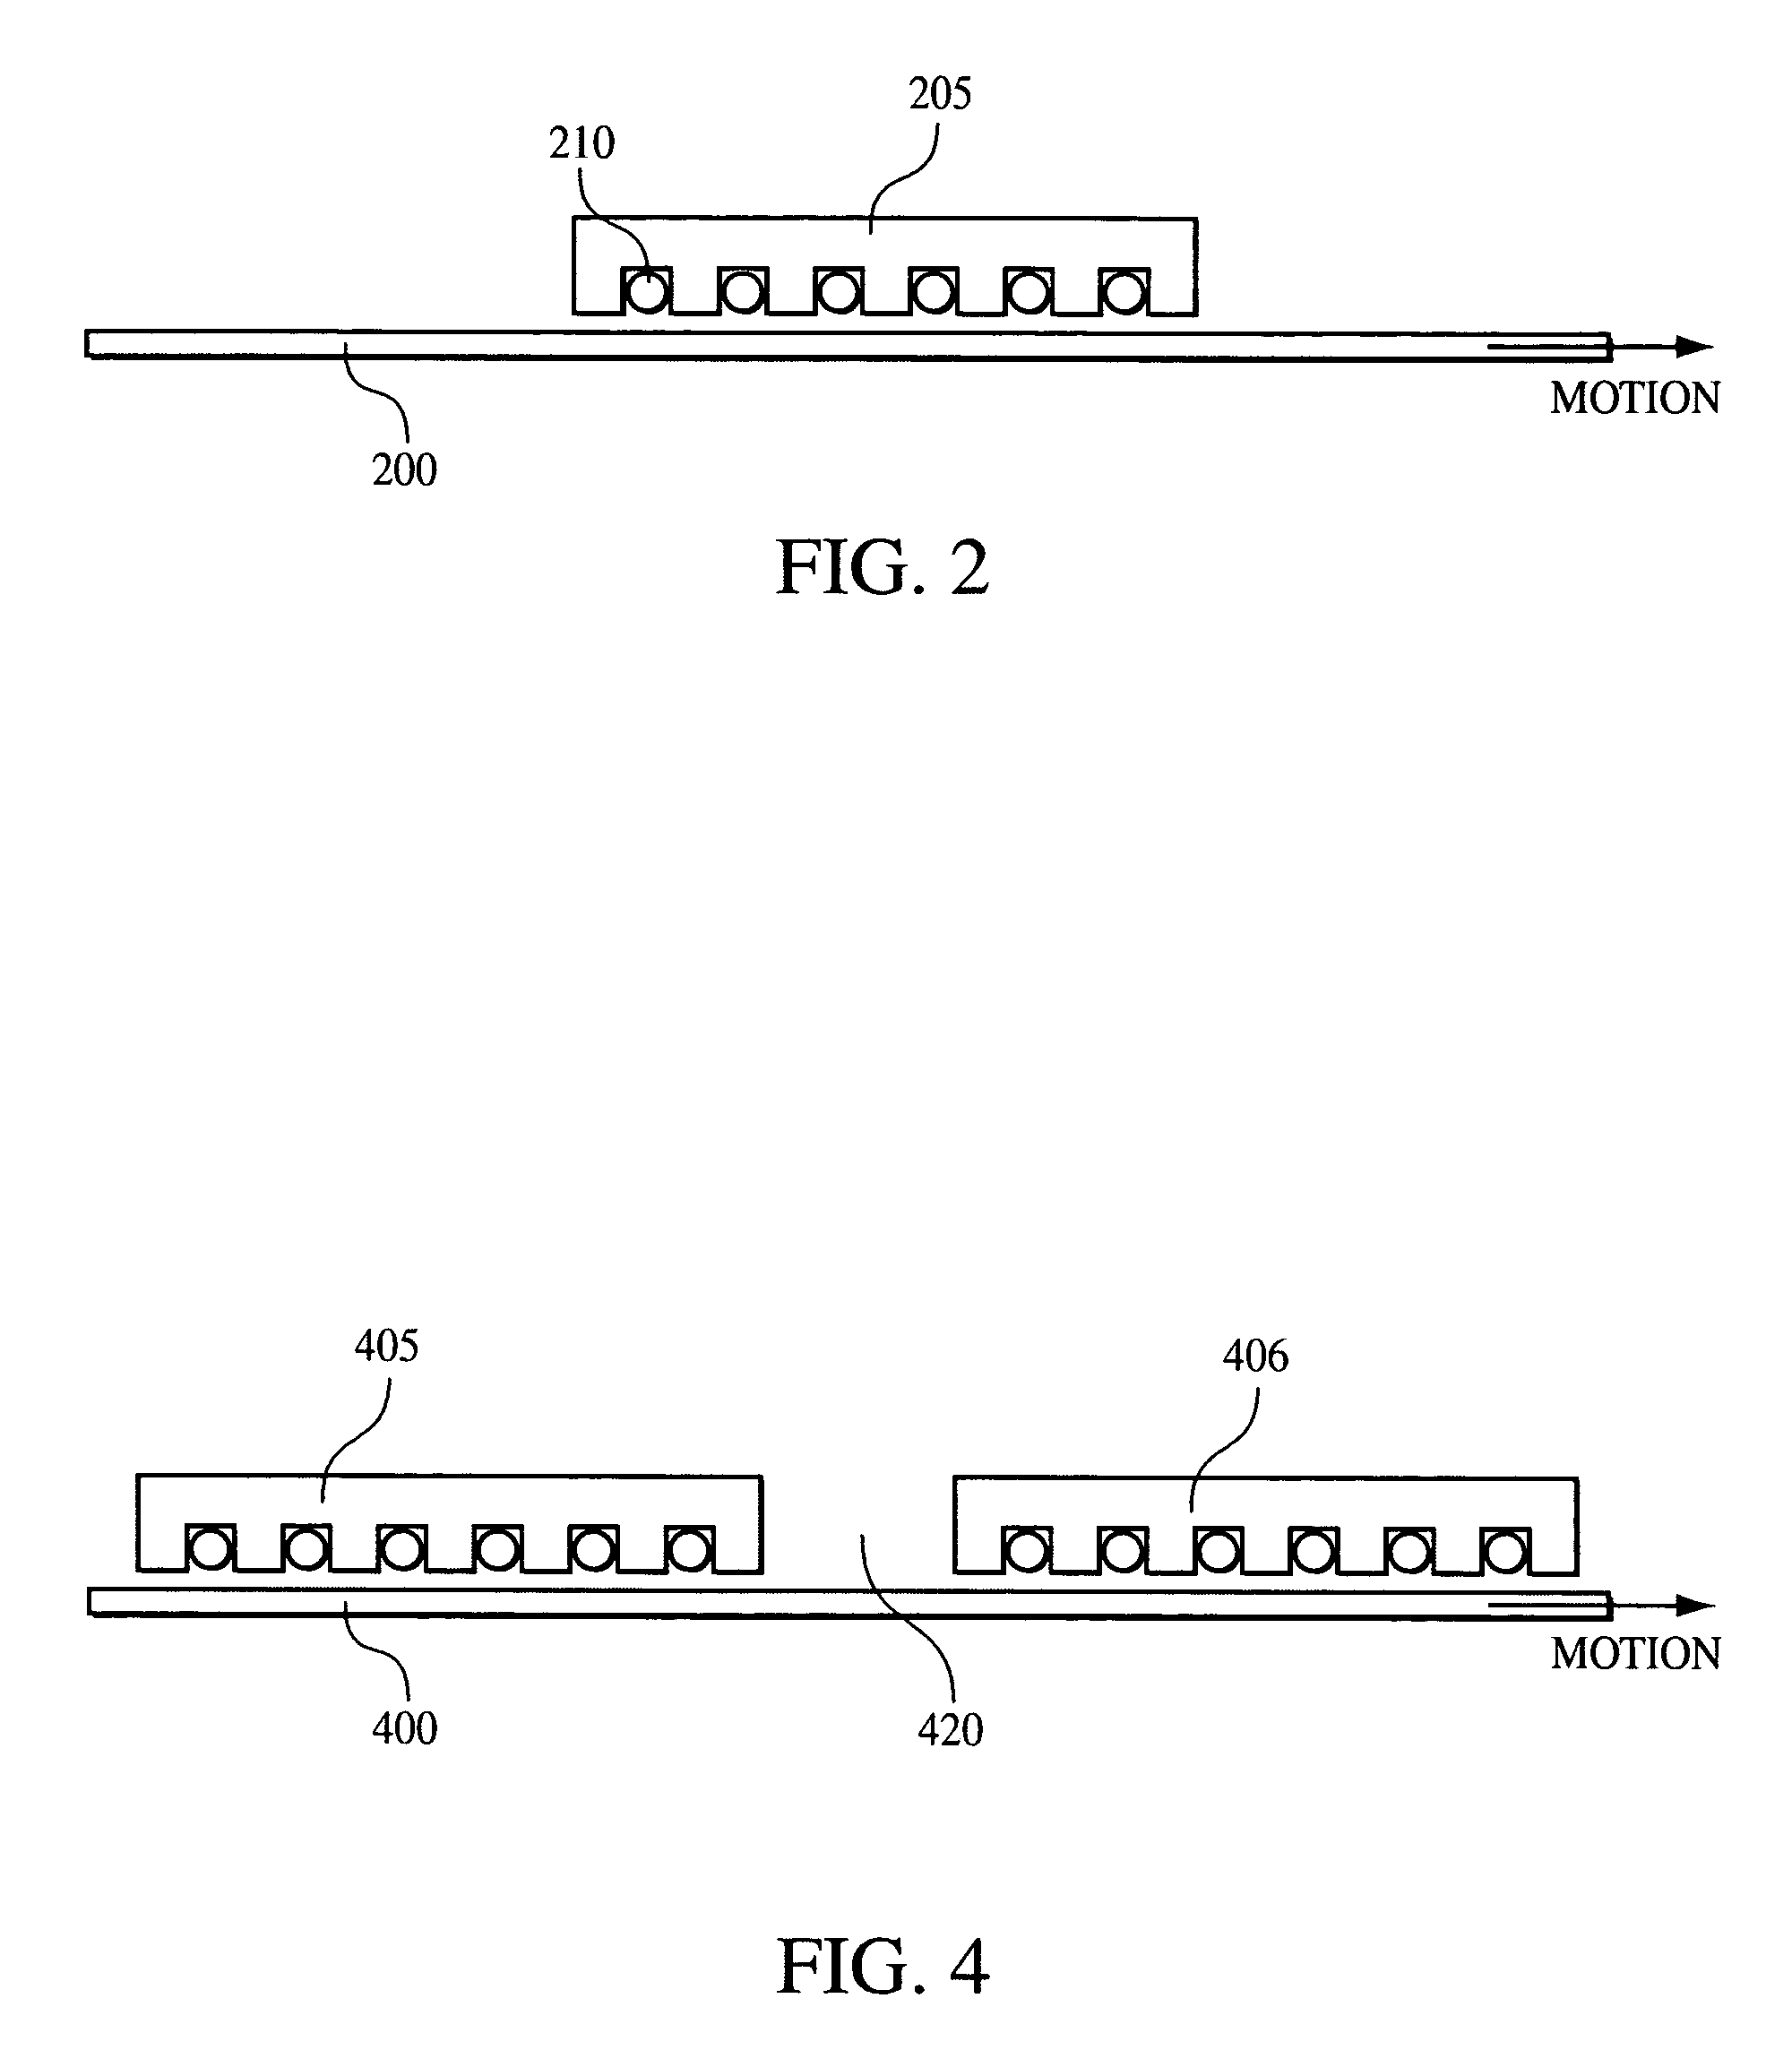 Modular linear electric motor with limited stator excitation zone and stator gap compensation